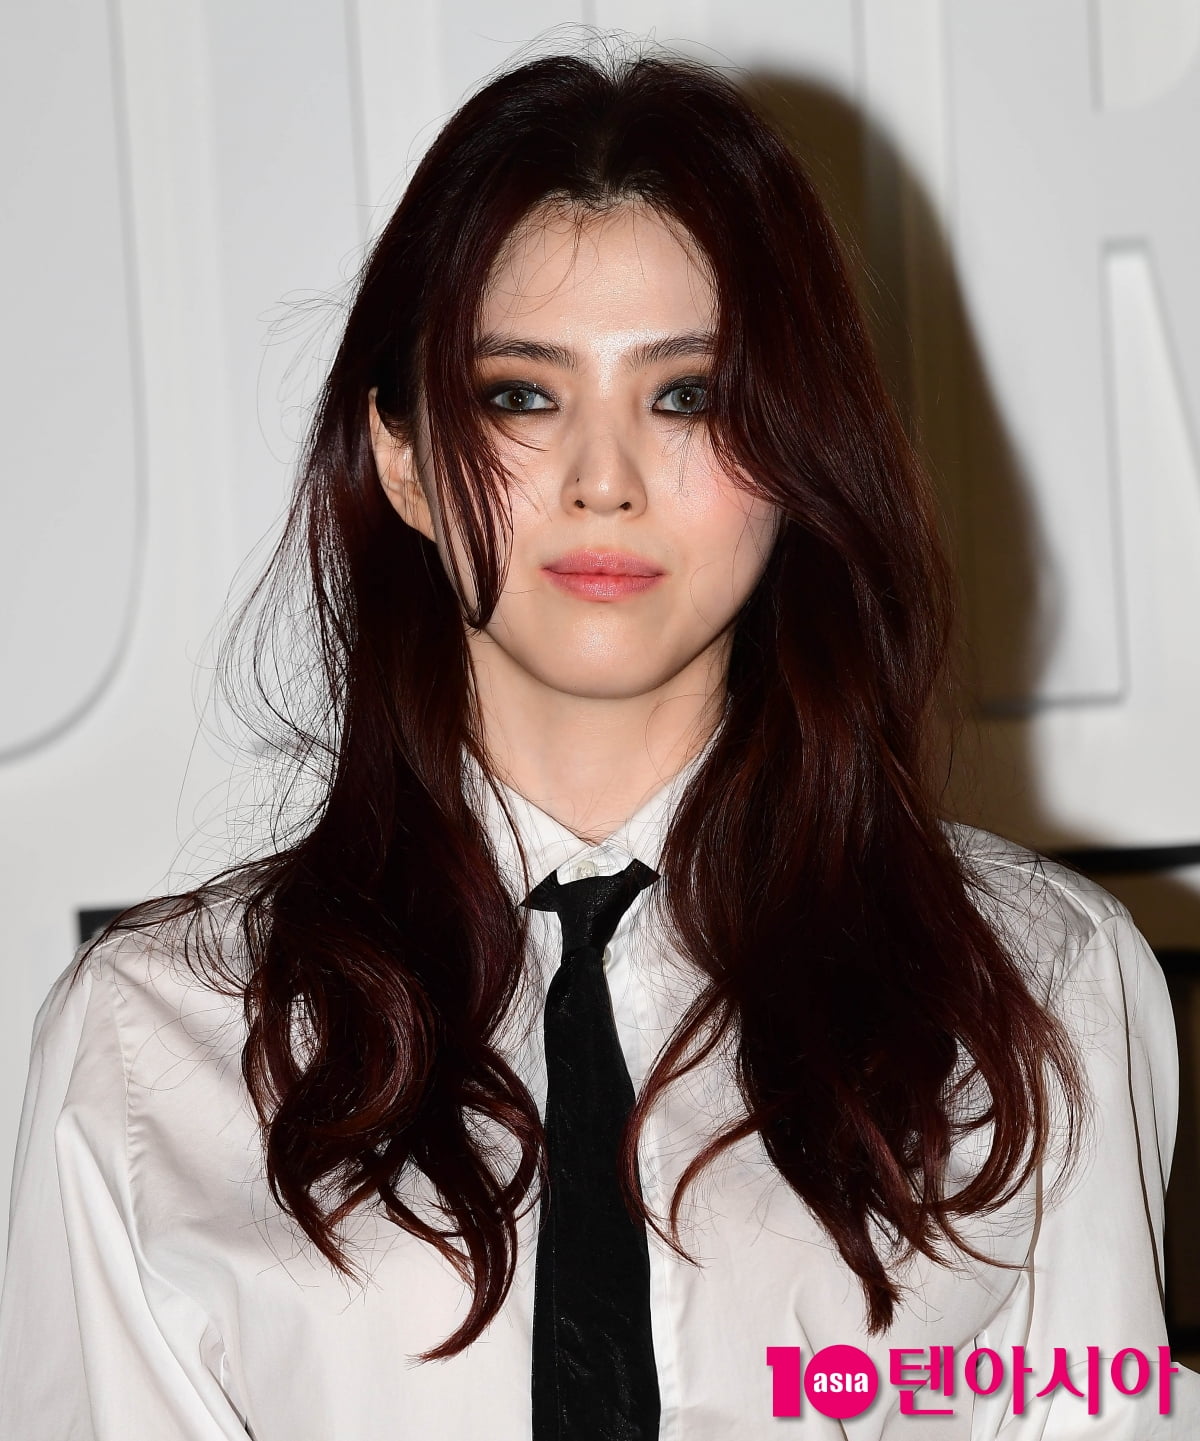 Han So-hee, will her agency's disciplinary action work